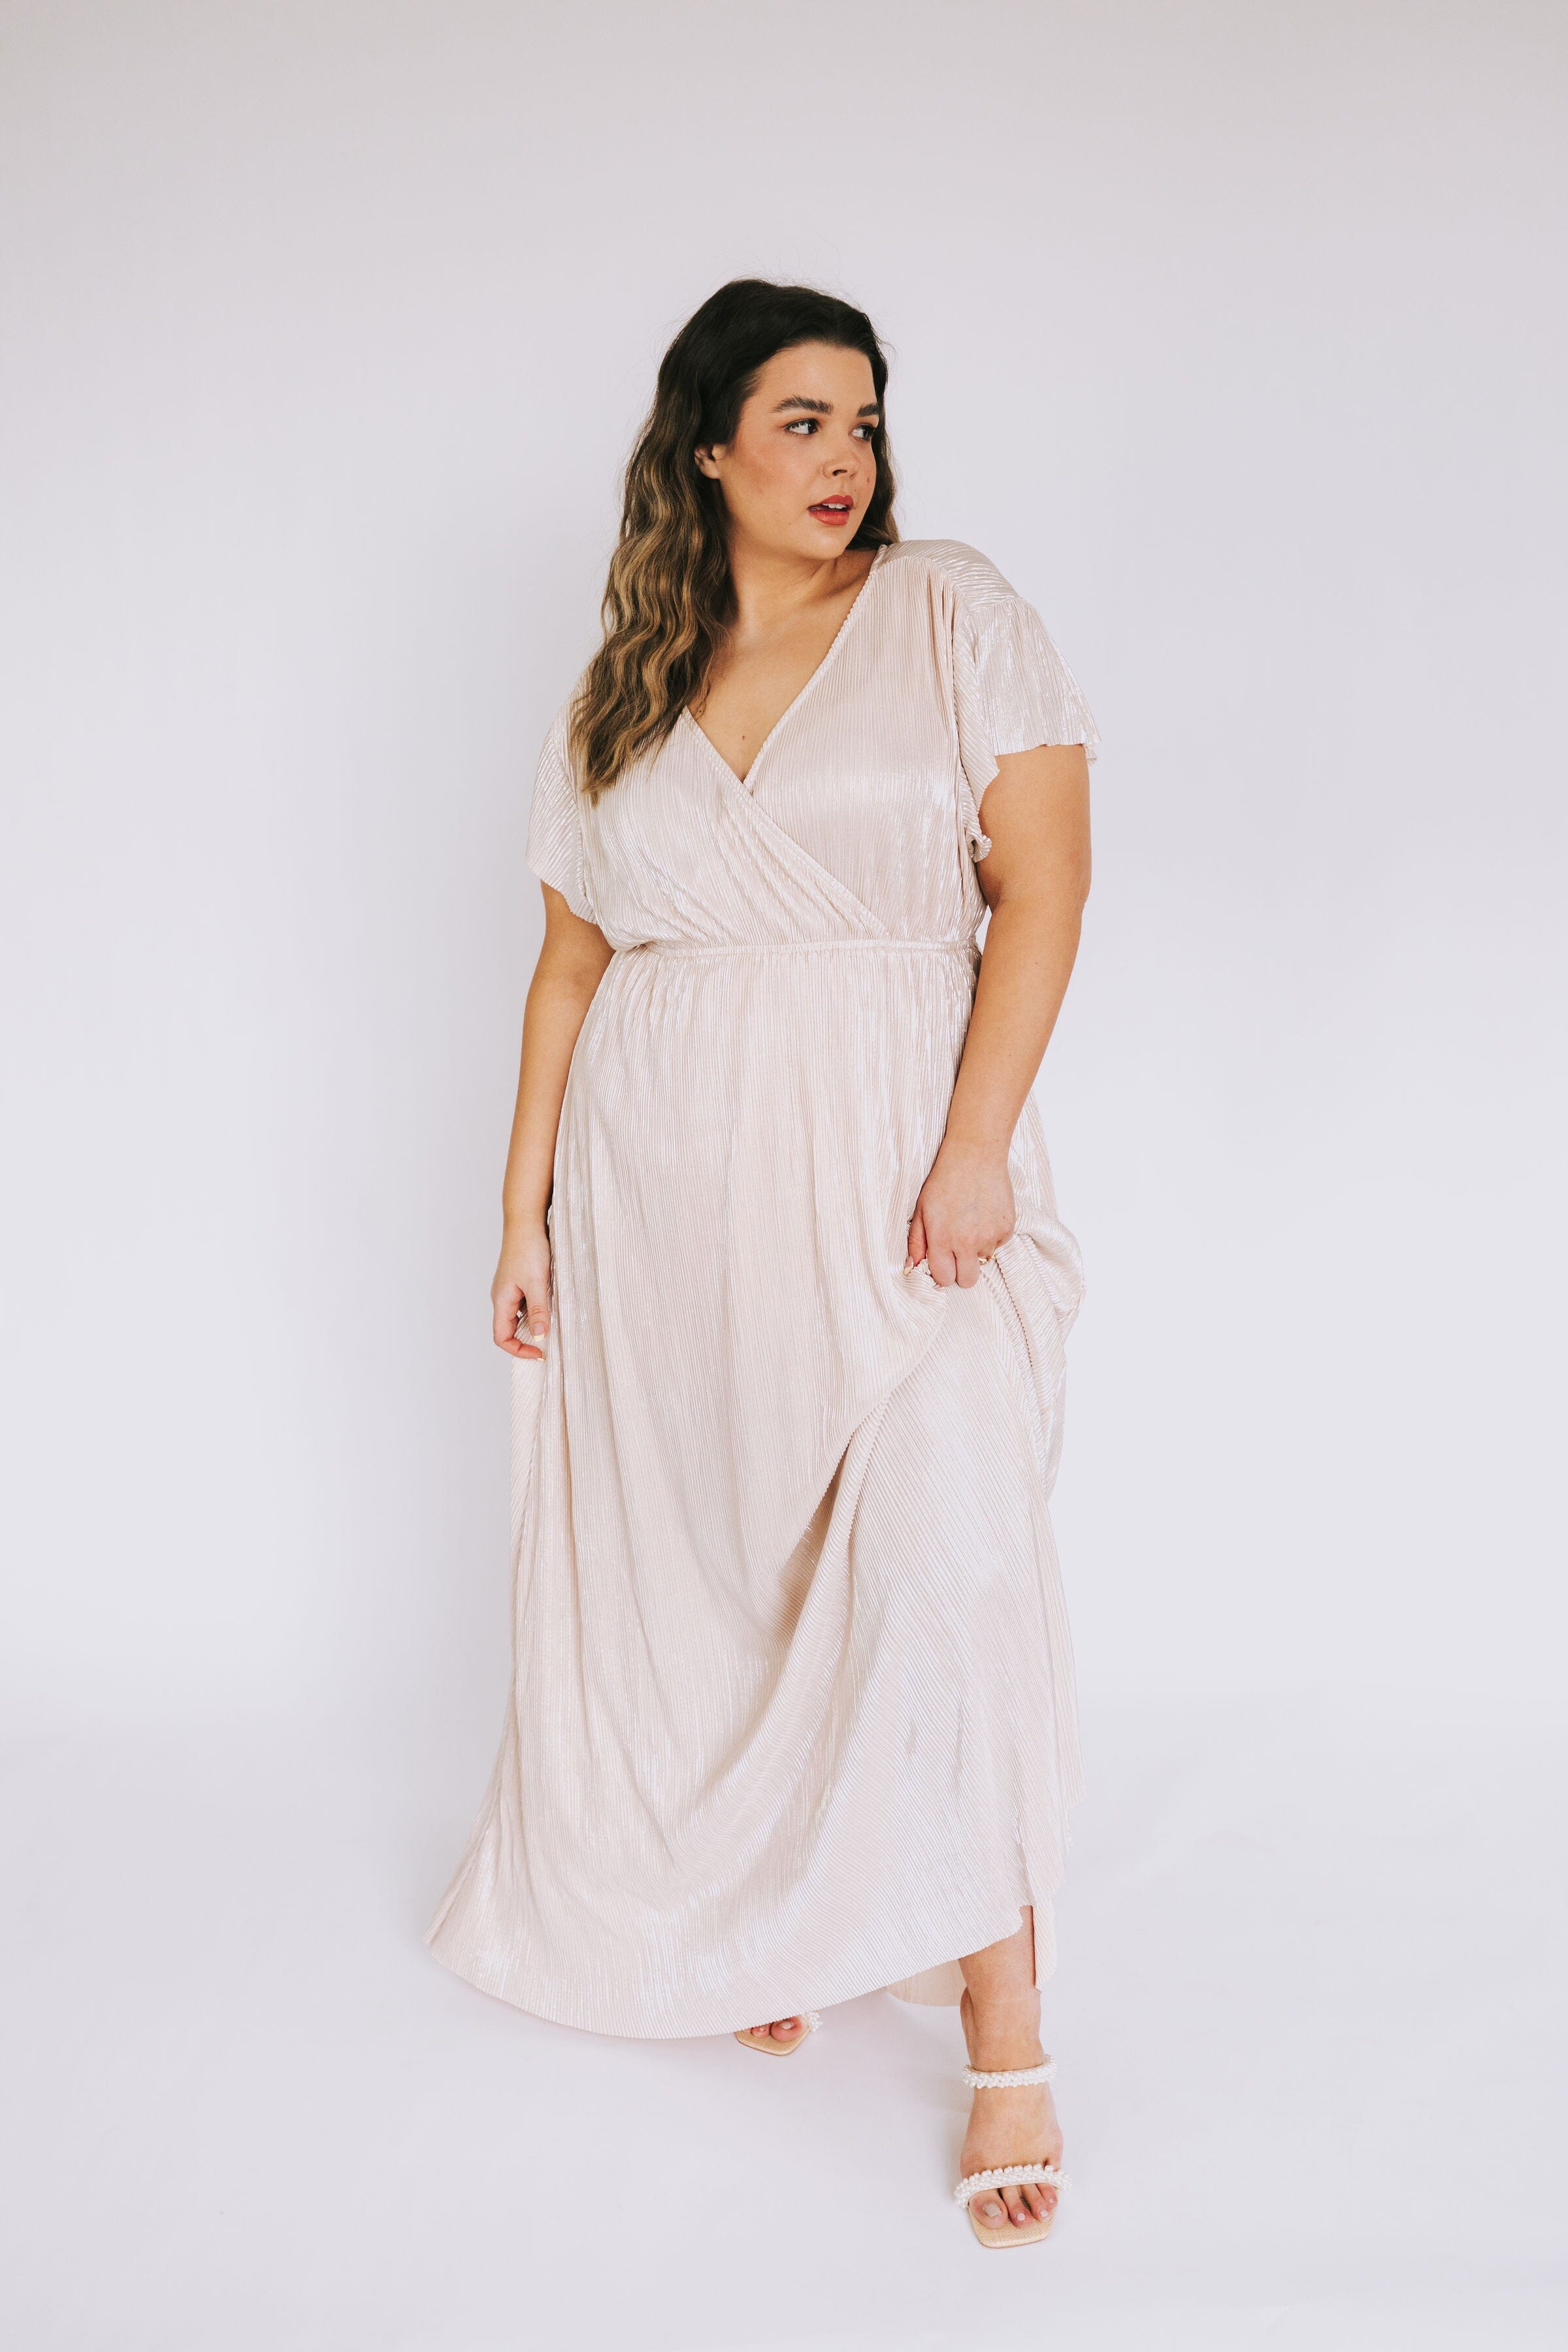 PLUS SIZE - Never Forget You Dress - 2 Colors!